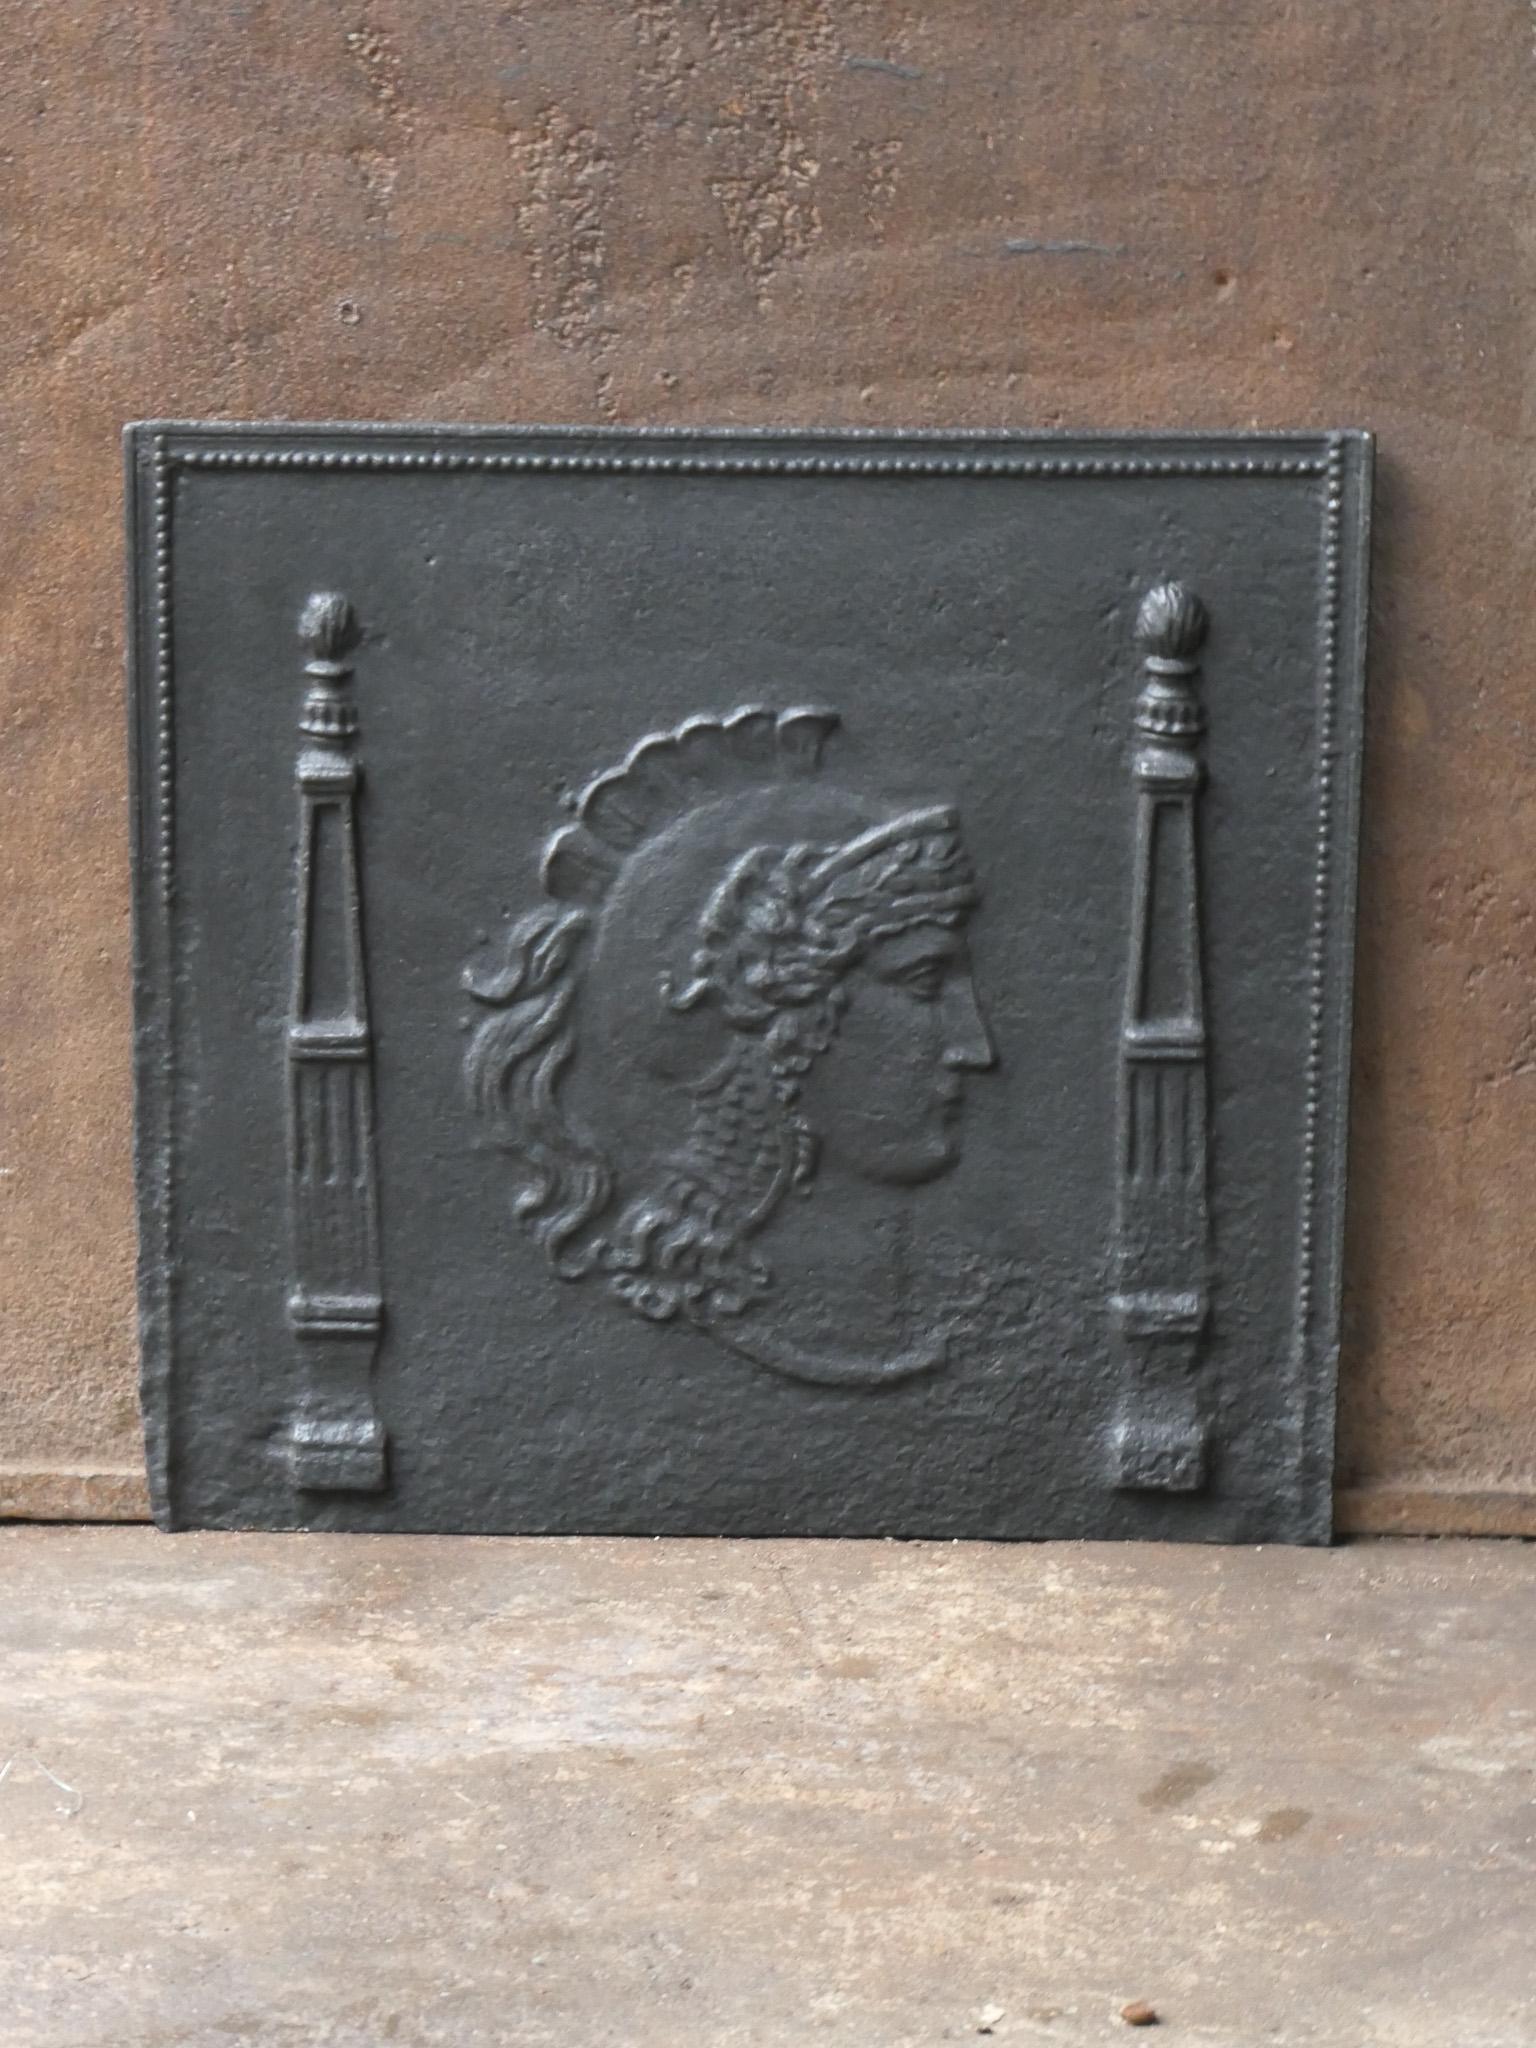 Beautiful 18th/19th century French Neoclassical fireback with a Roman Soldier and two pillars. 

The fireback is made of cast iron and has a black patina. It is in a good condition and does not have cracks.